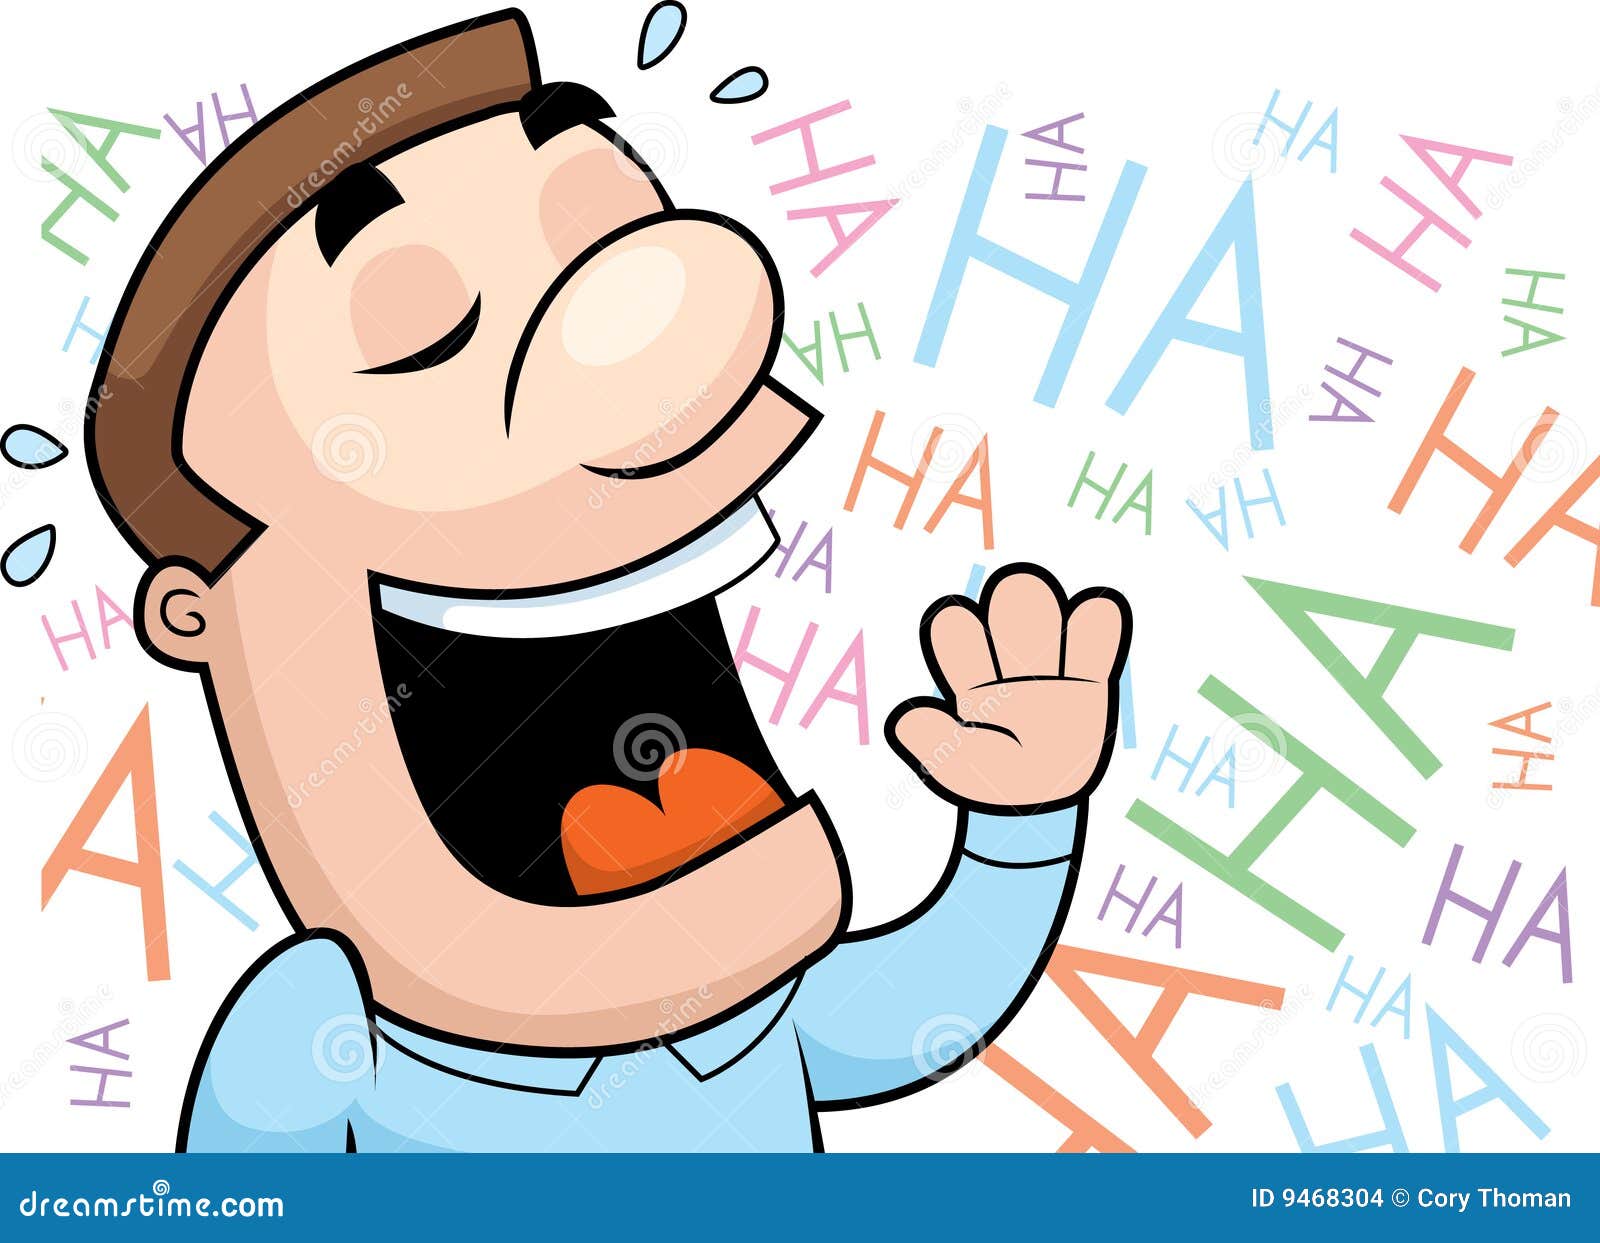 clipart laughter images - photo #41